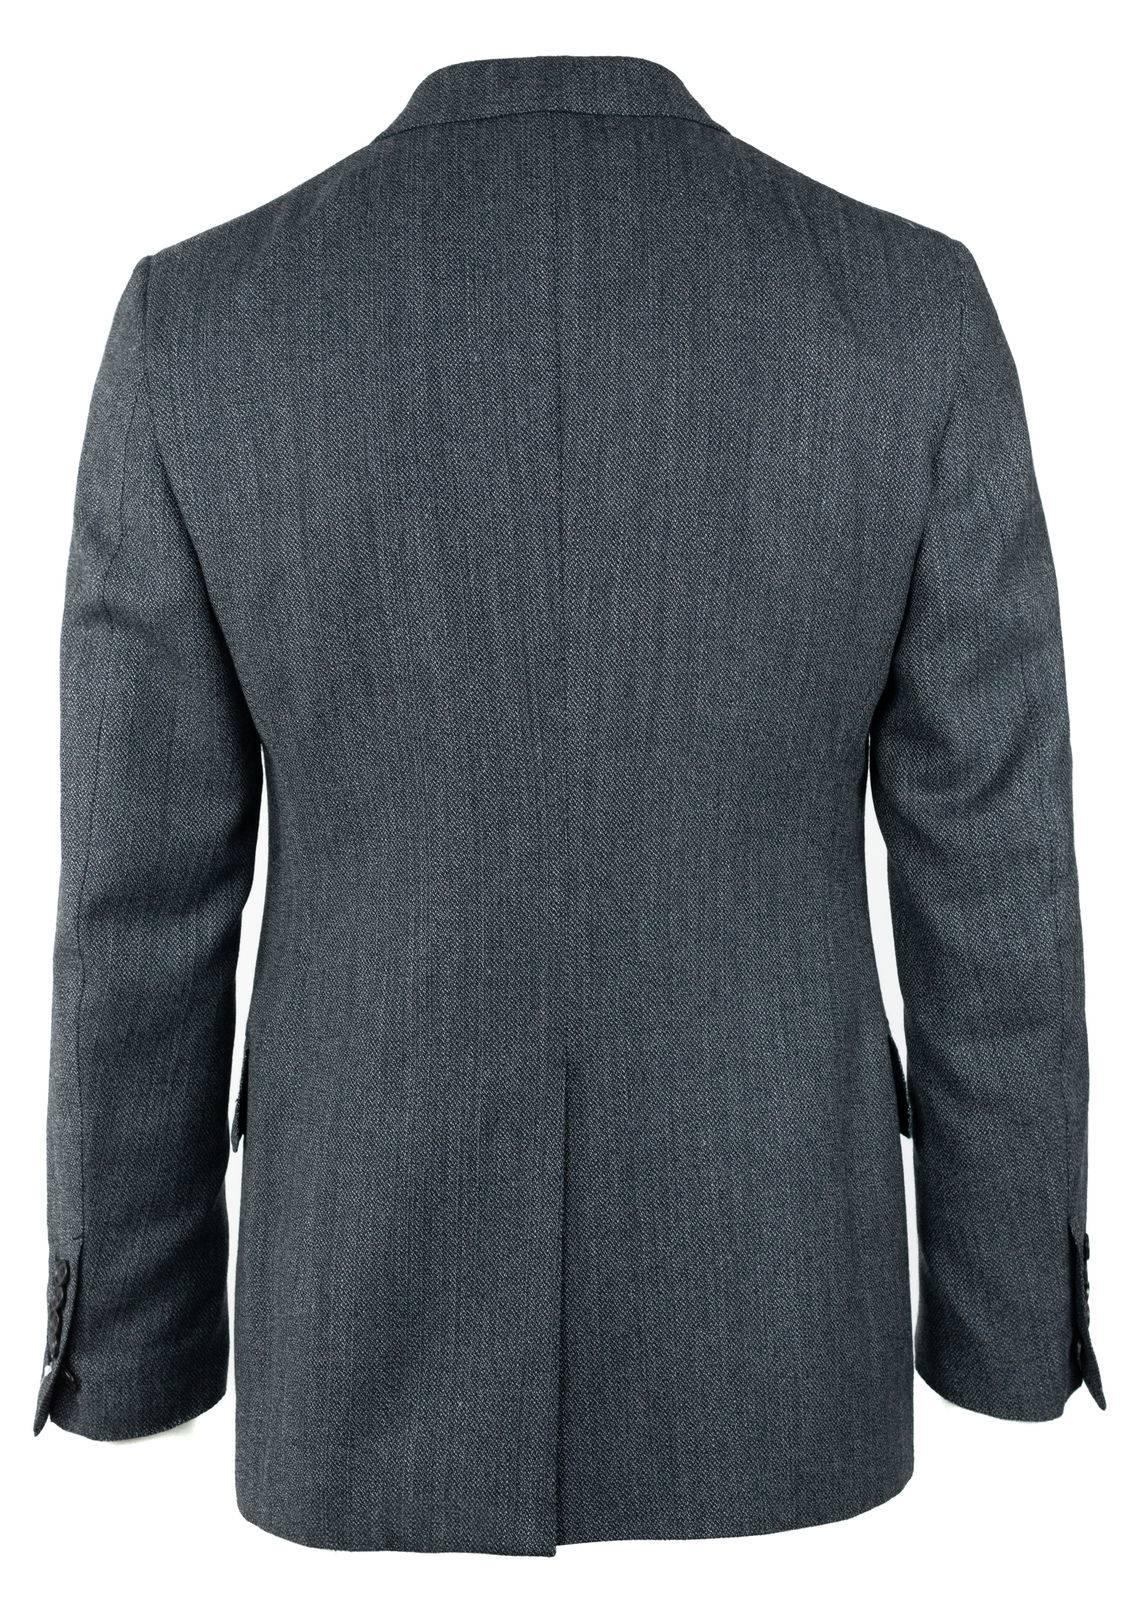 tom ford charcoal grey suit